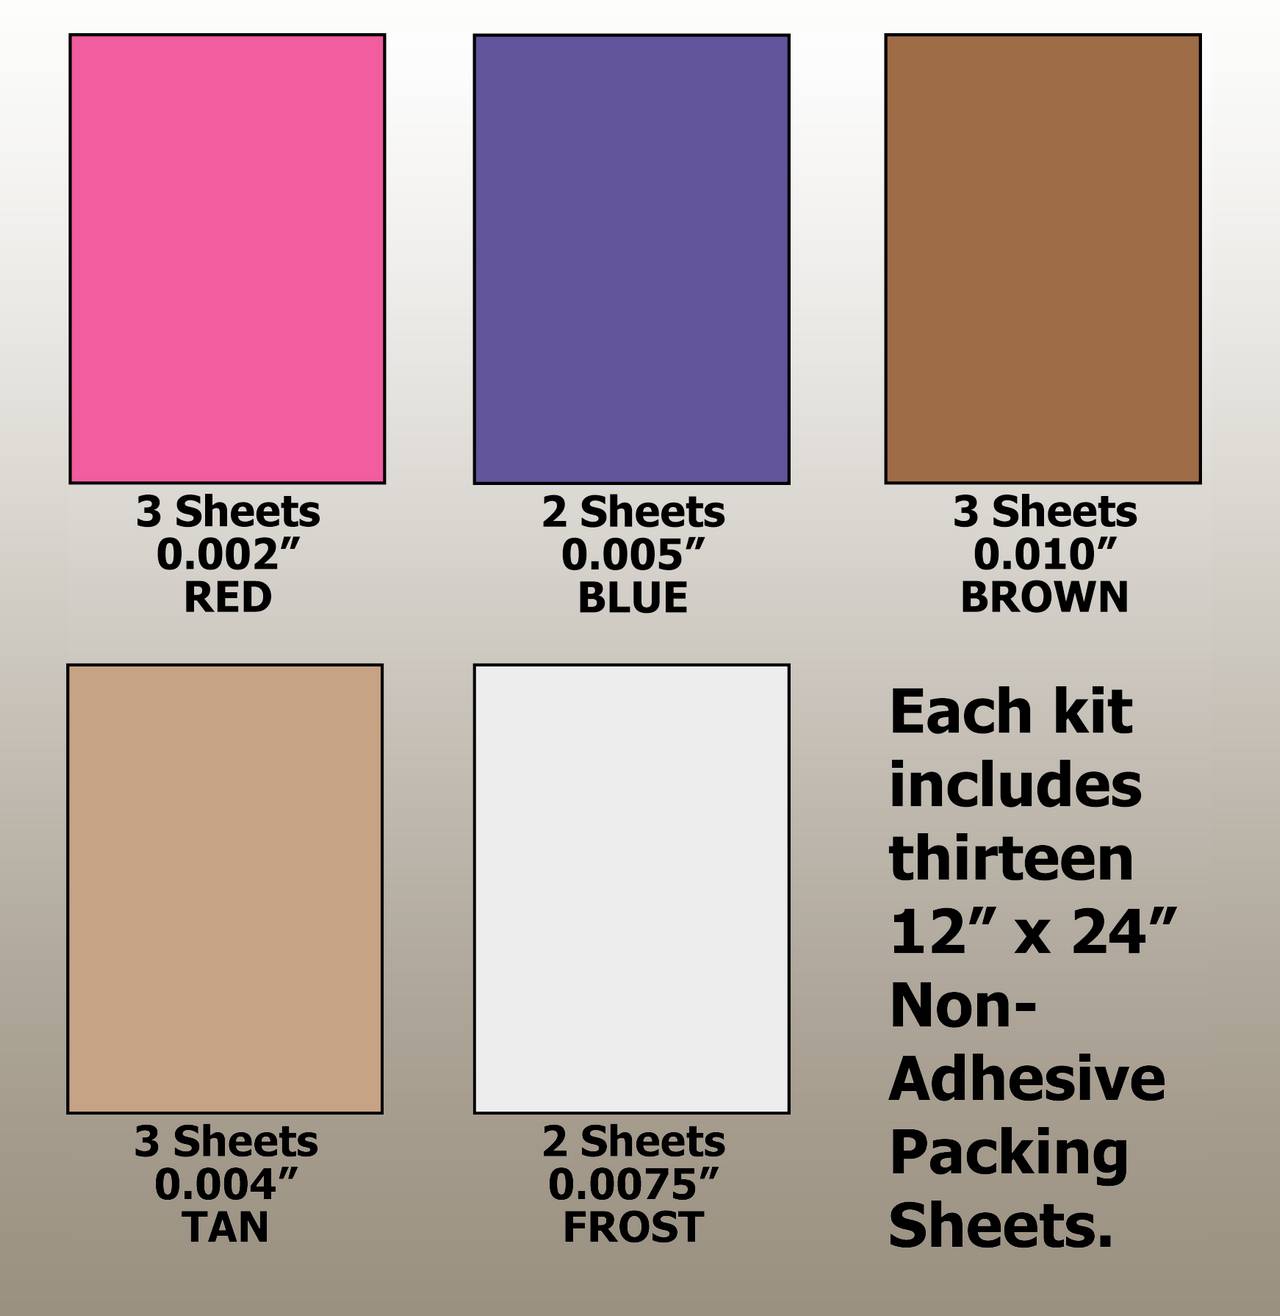 BLANKET/PLATE PACKING KIT 13 Pieces - 12" x 24" Sheets